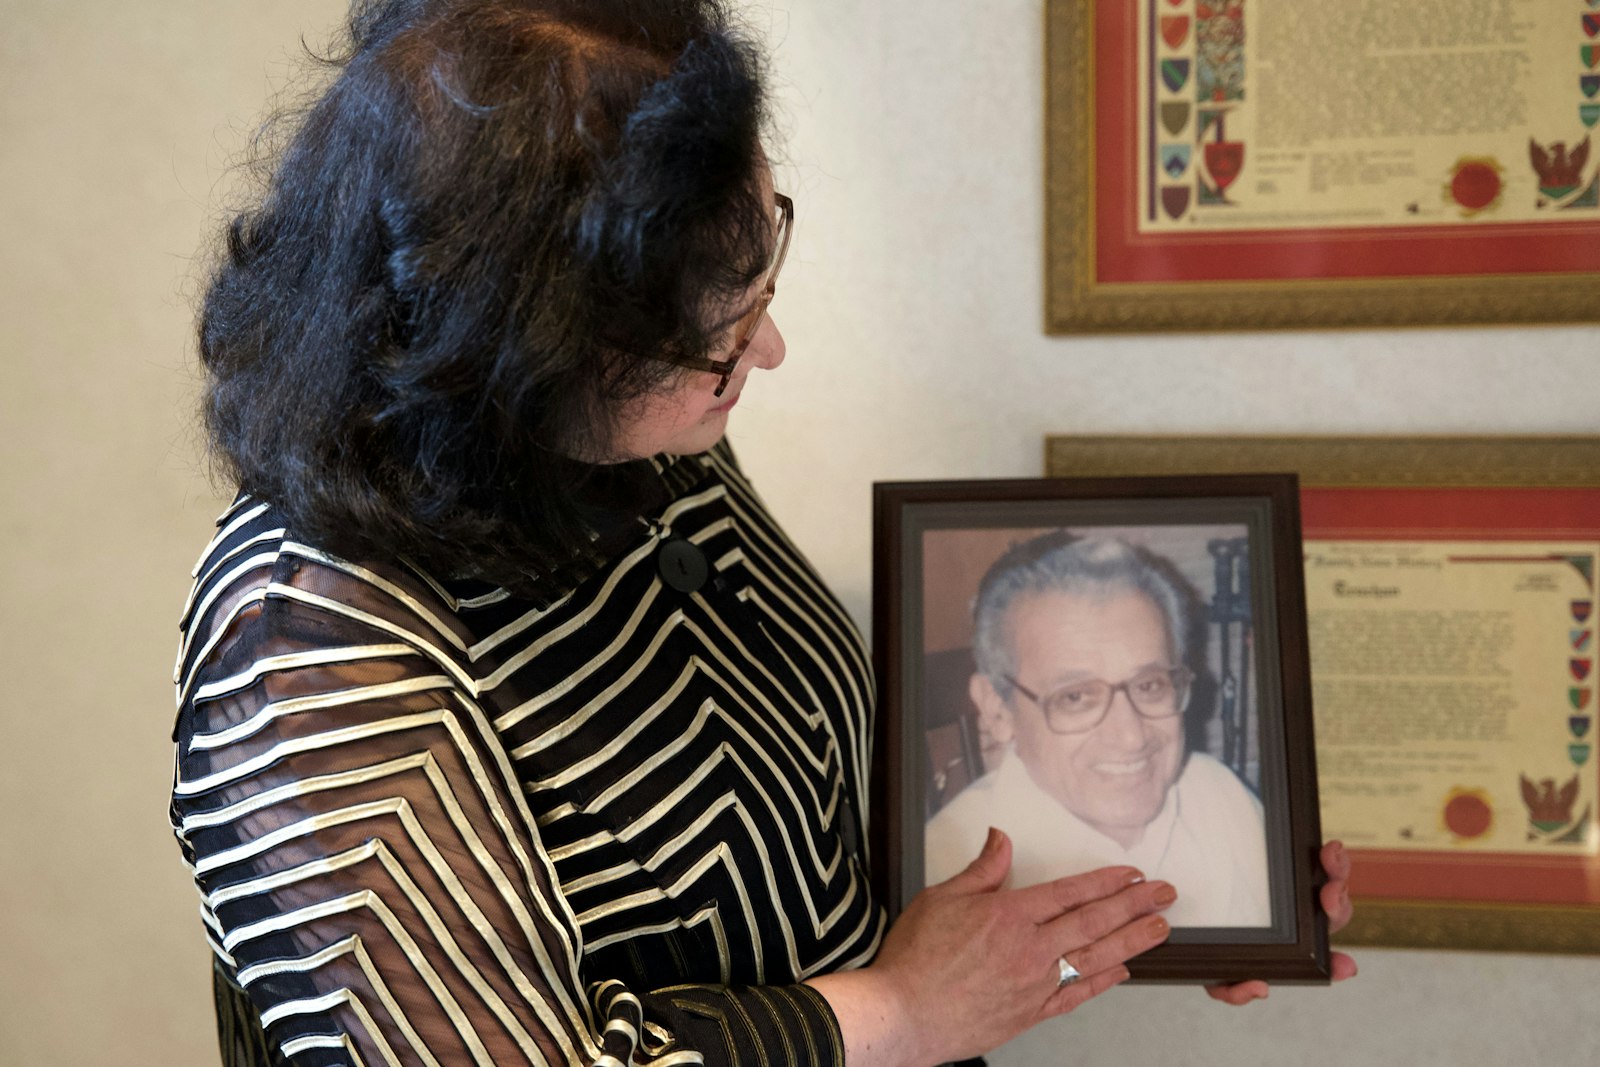 Truchan holds an image of her father, Dr. Aristeo Acosta Carreón. As president, Truchan hopes to convey a message told to her by her father: Tu vales mucho — "You are of much value."